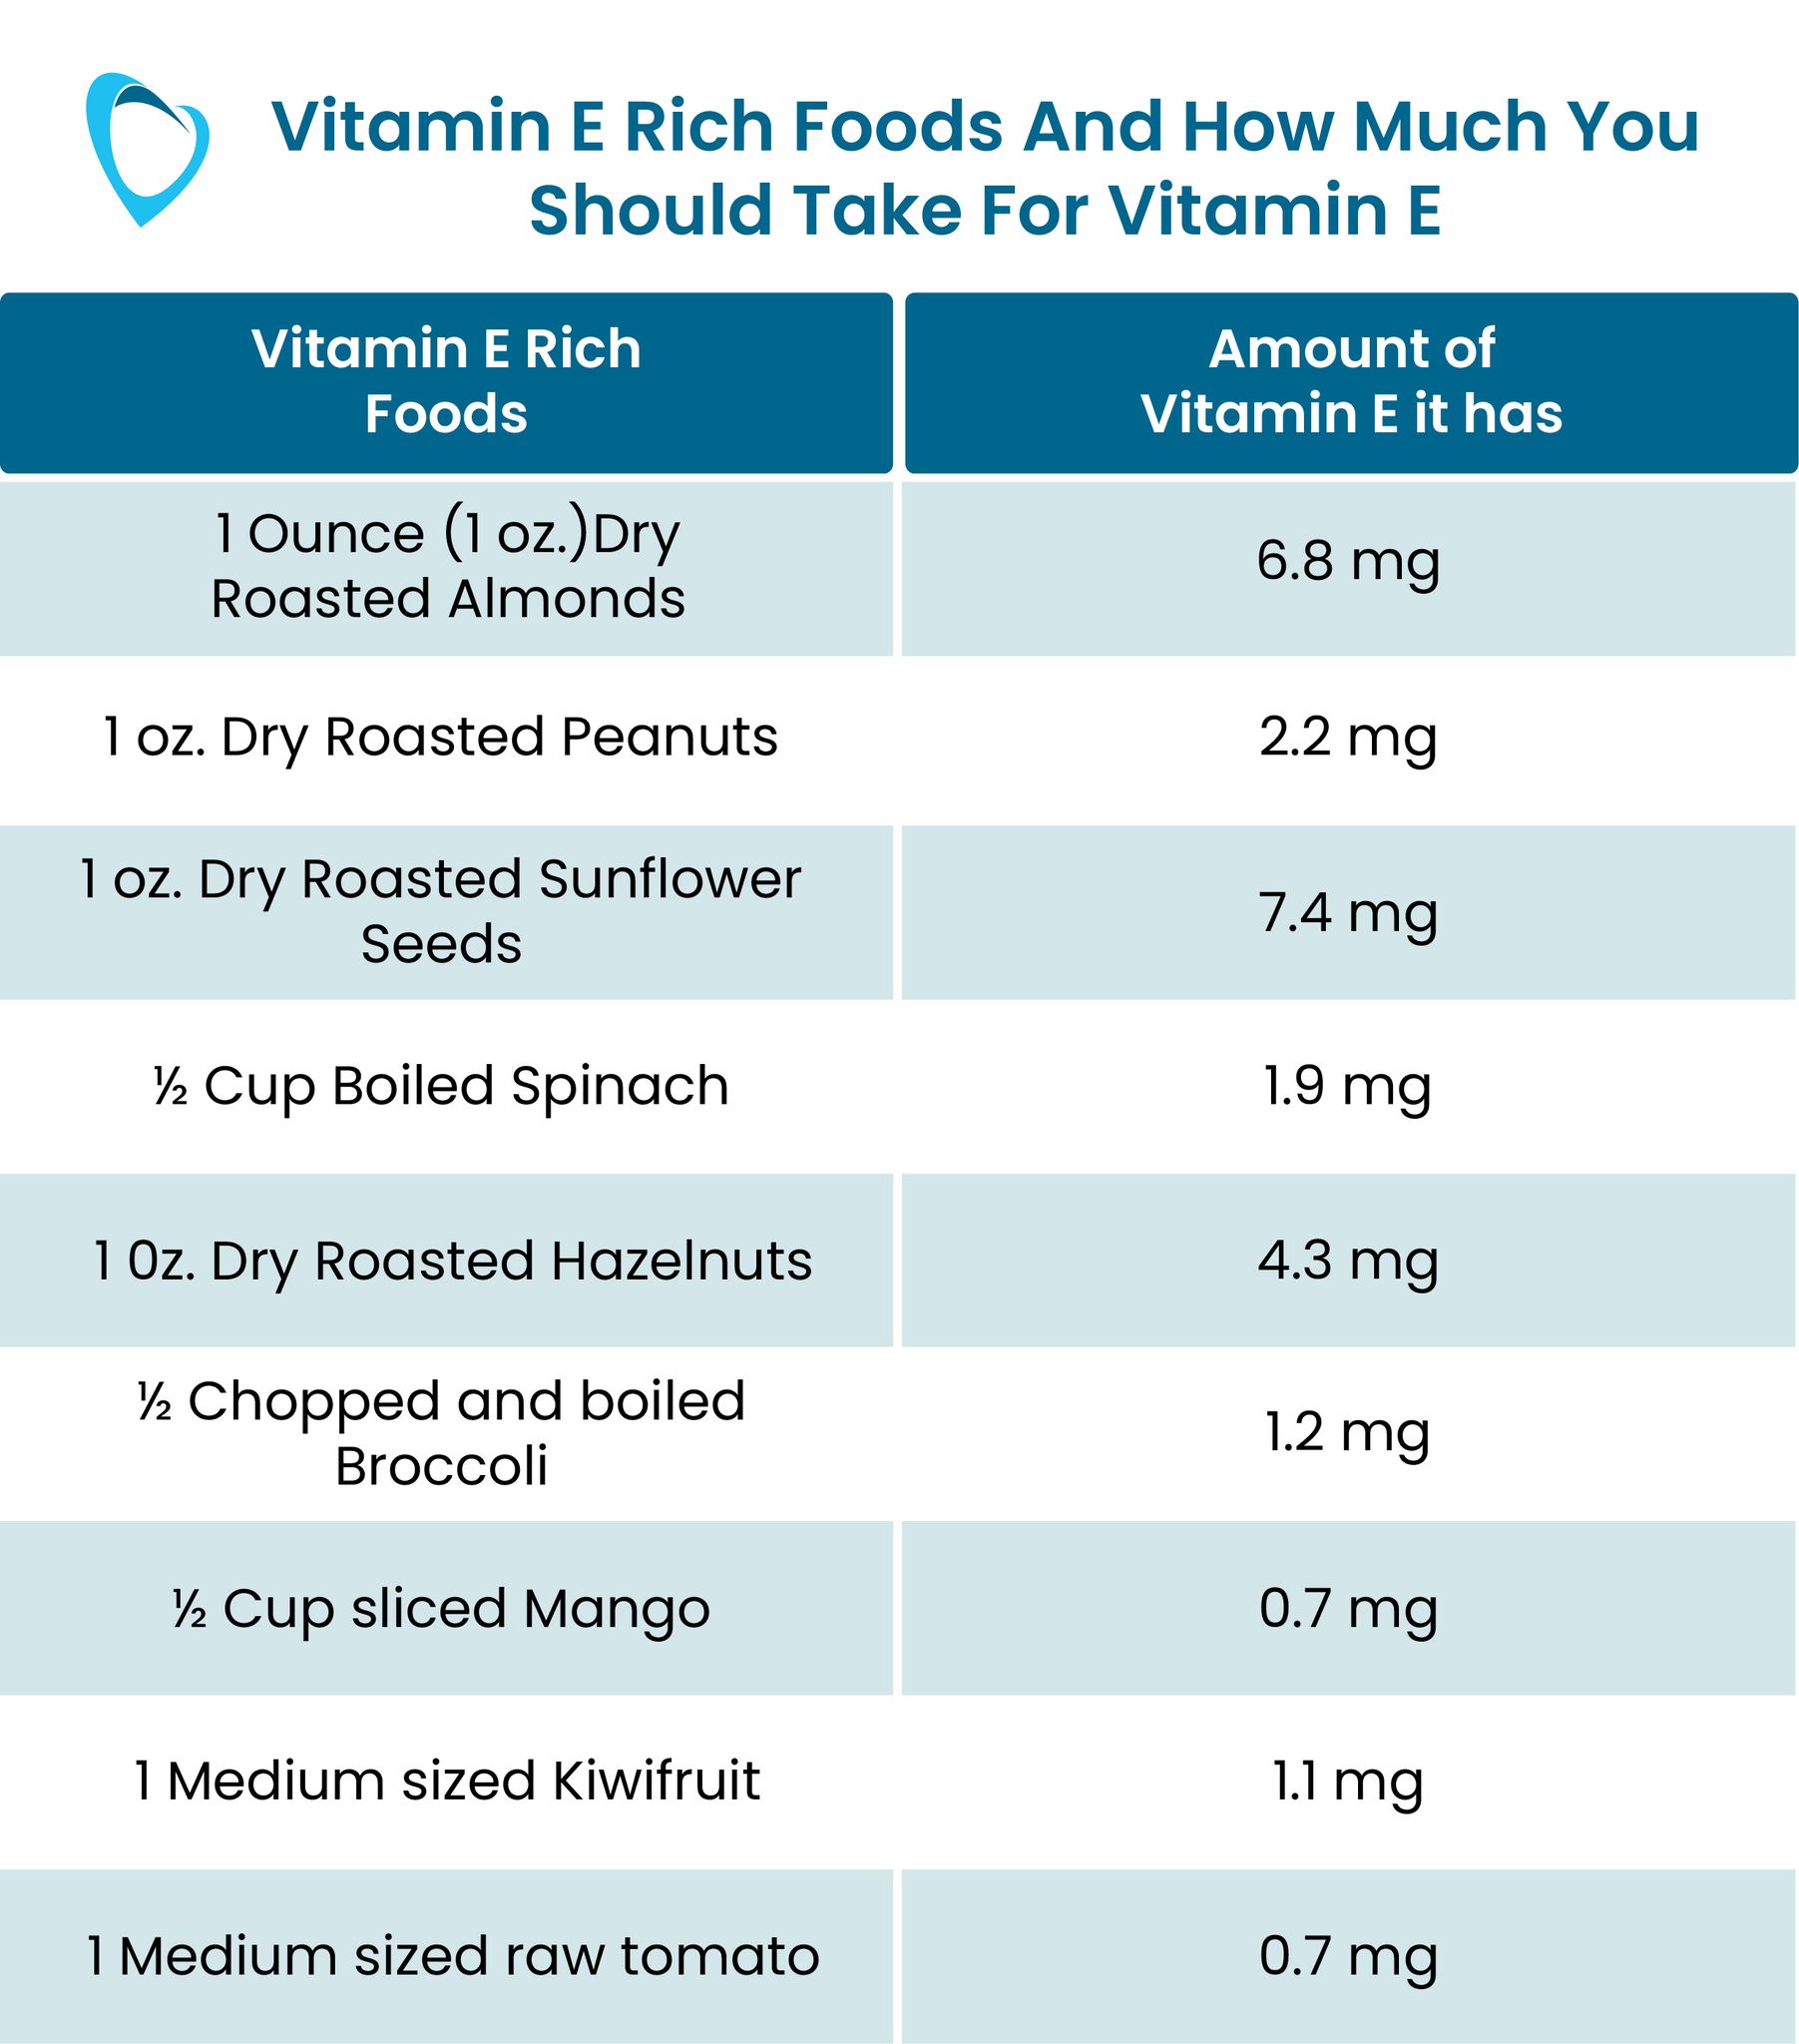 Foods to Get Your Vitamin E